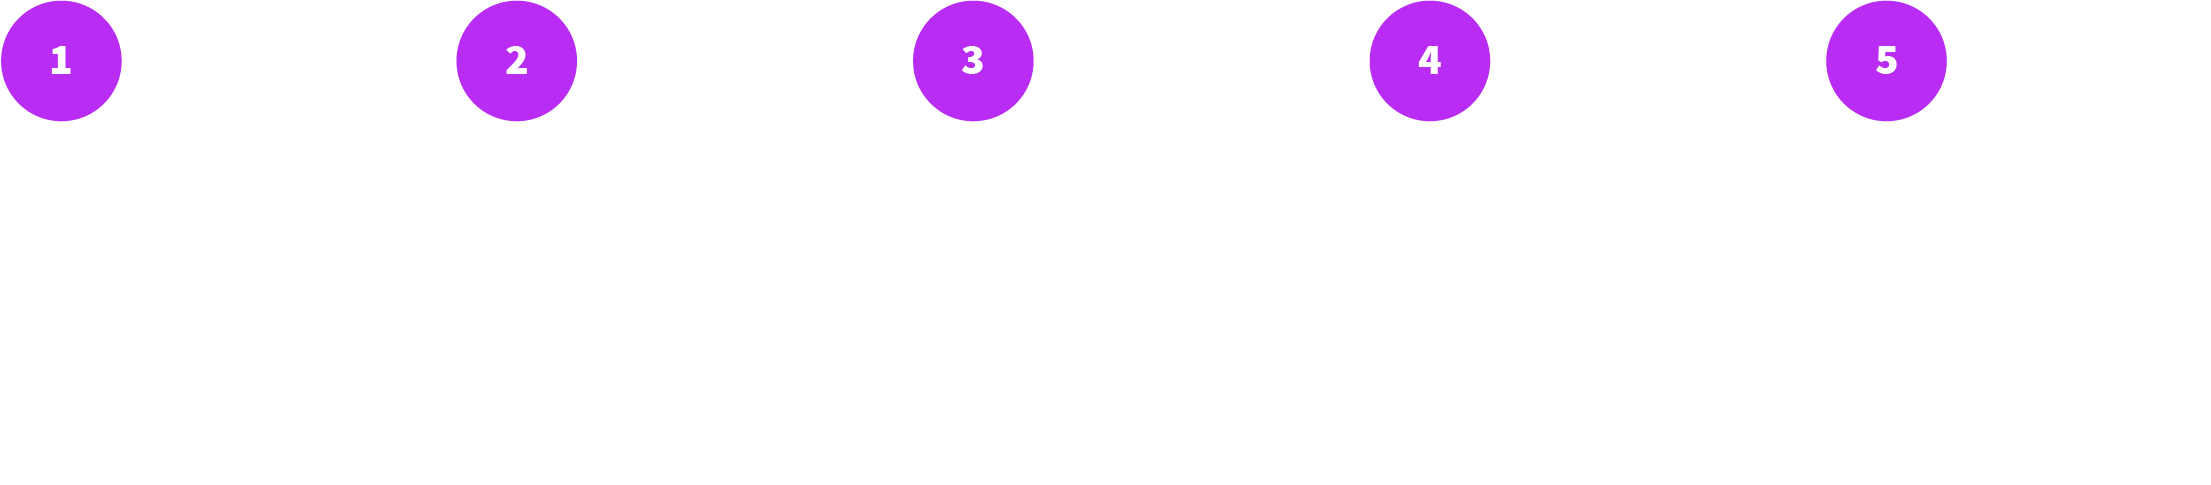 SupplyKick’s Path to Partnership for Agency and Wholesale Brands